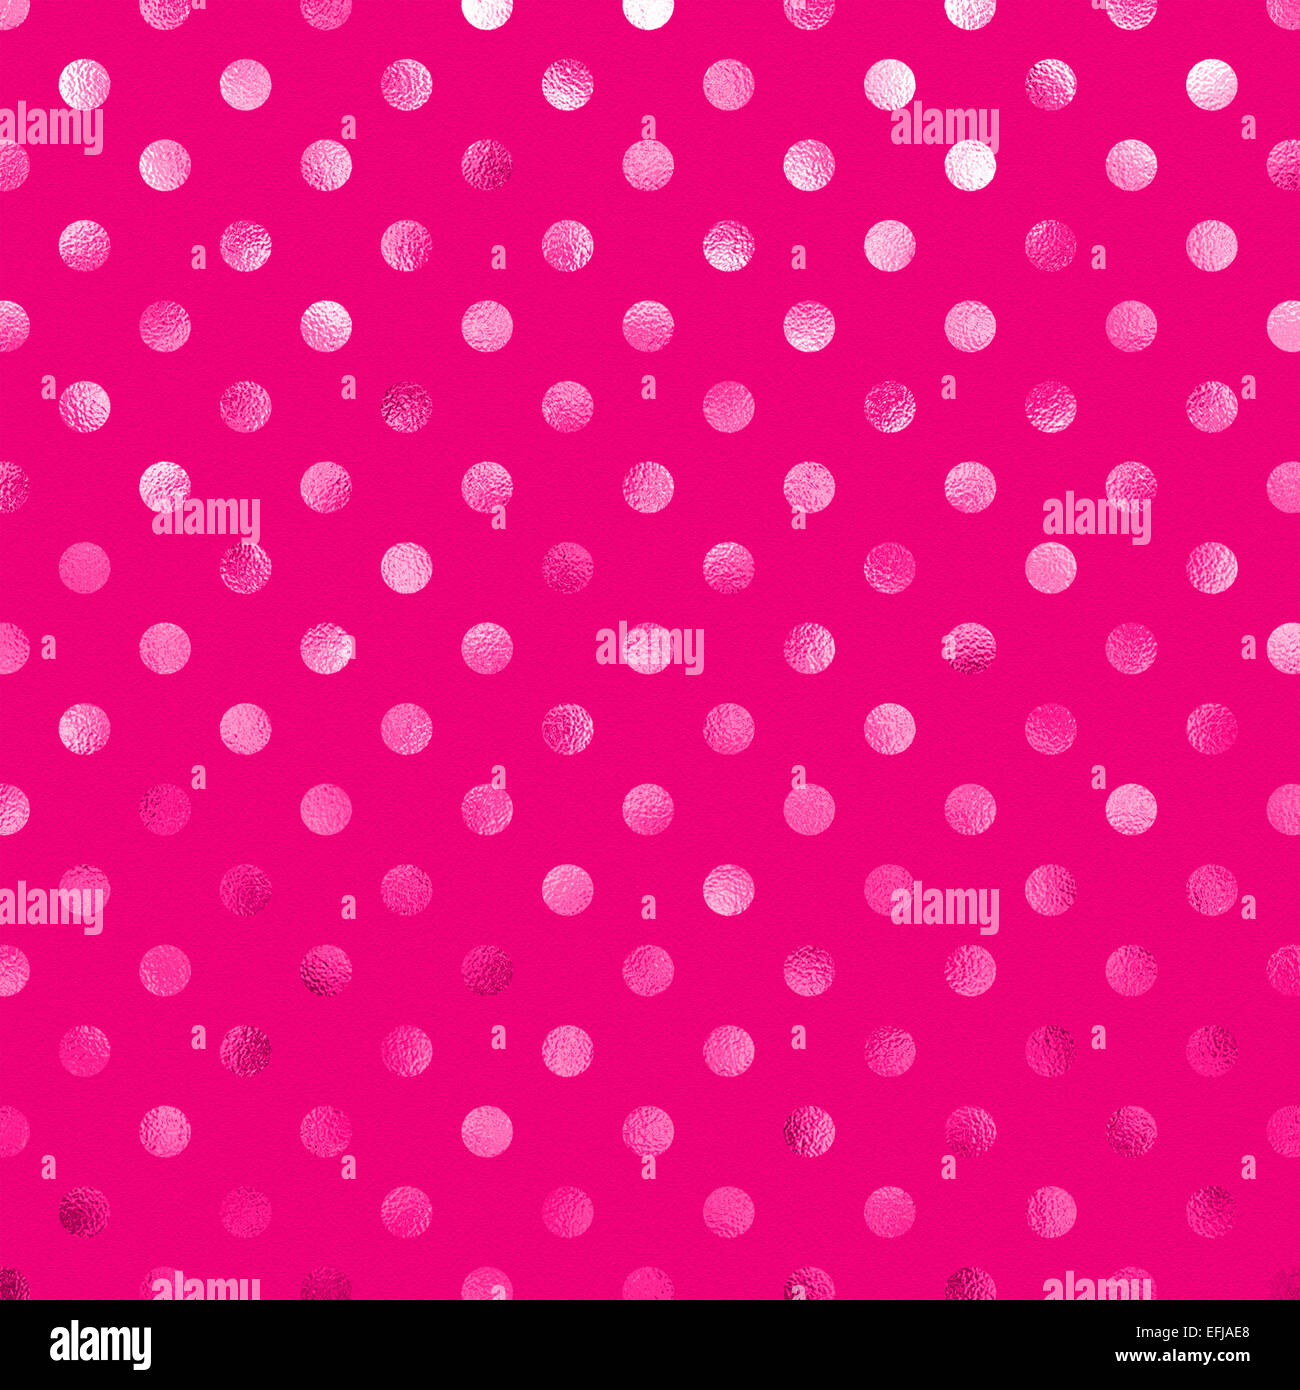 Hot Pink Metallic Foil Polka Dot Pattern Swiss Dots Texture Paper Color Background Stock Photo